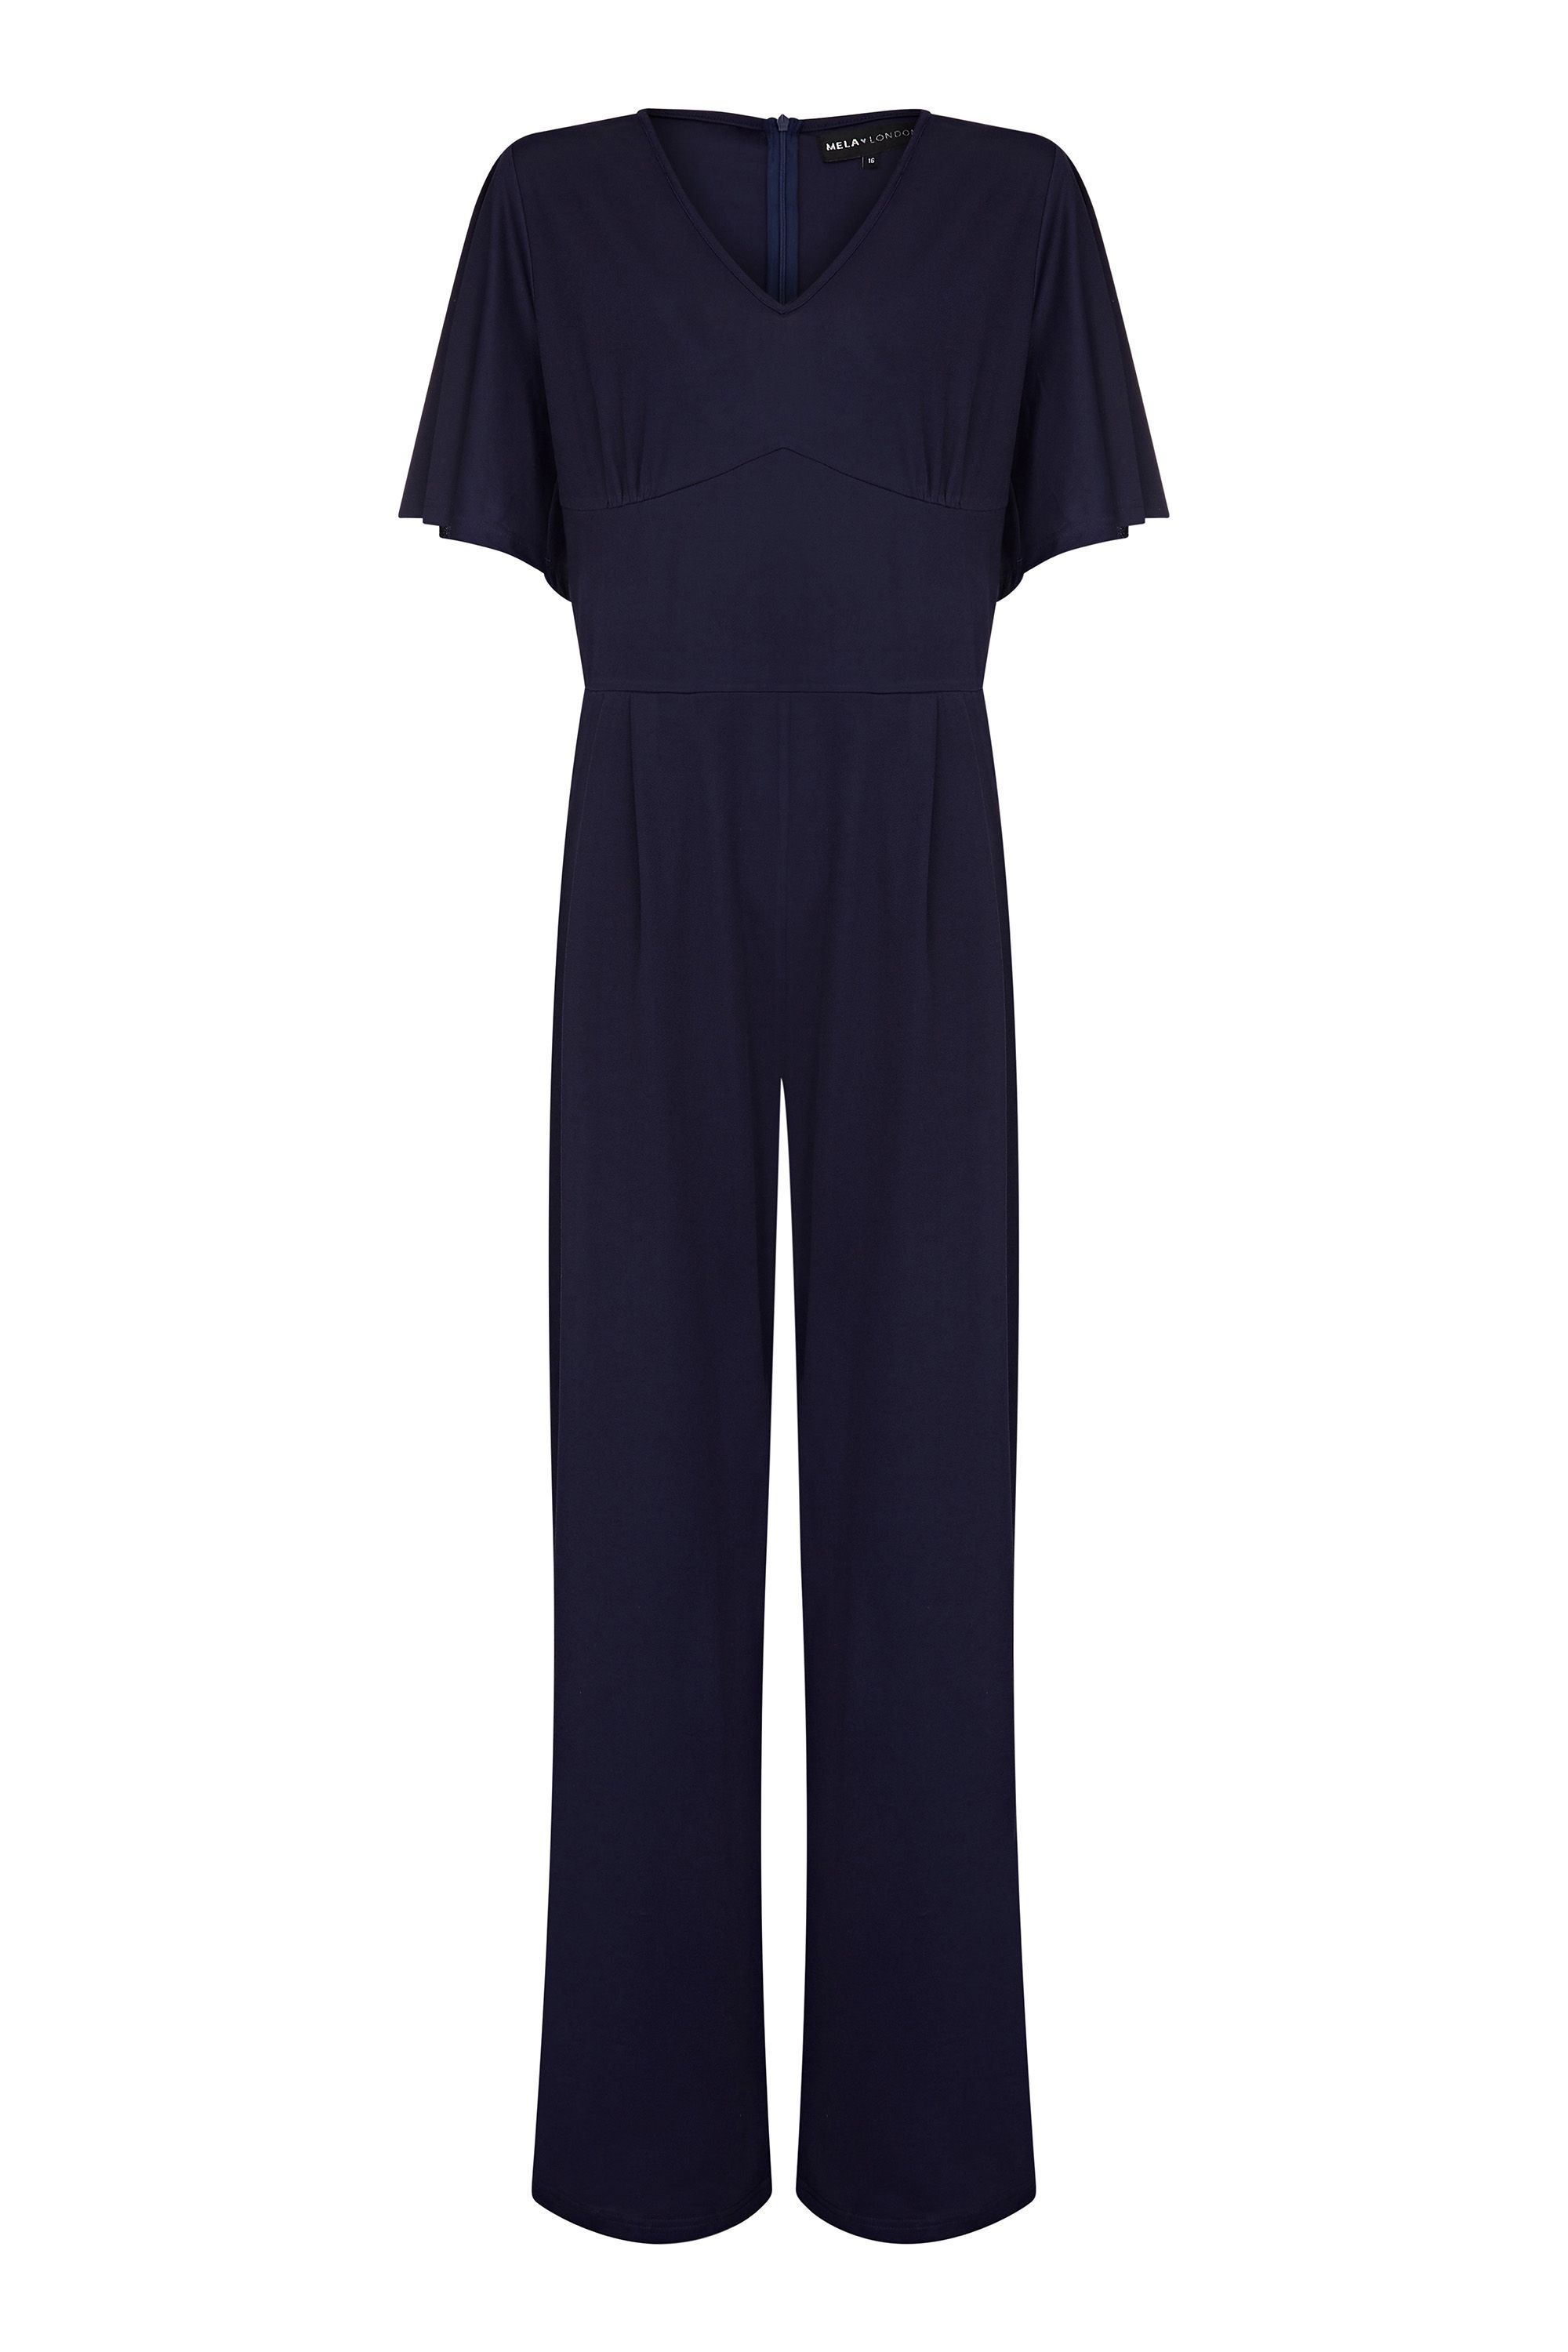 Refine your look with this Mela Plus Size Fluted Jumpsuit. Featuring soft-touch fabric that's comfortable and stylish, it's designed with short flowing sleeves, a cinched waist and relaxed trousers. Finished with a zip fastening, dress it up or down - depending on the occasion.